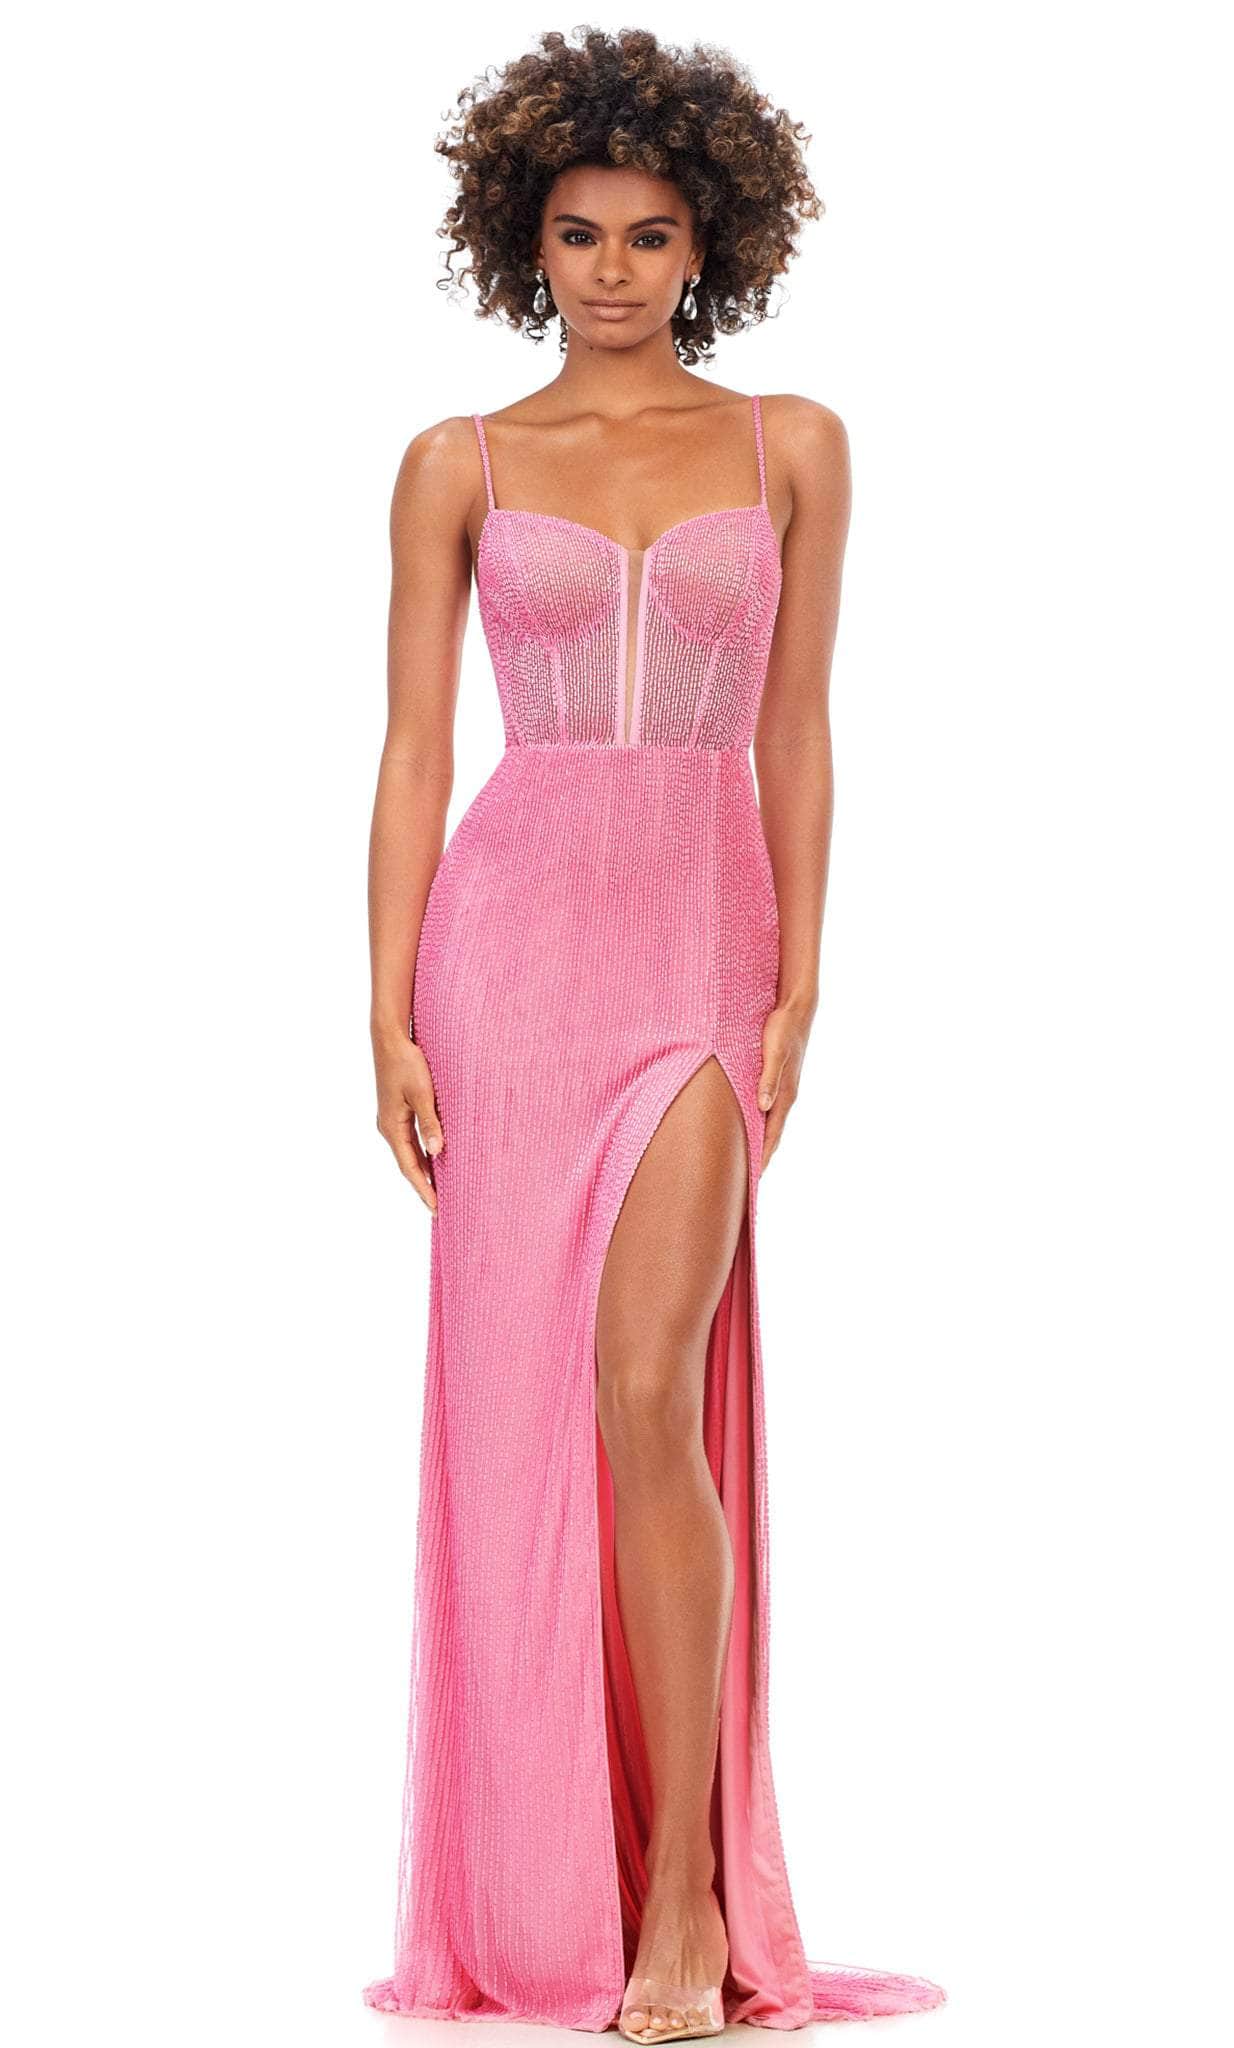 Ashley Lauren 11369 - Sleeveless Beaded Evening Gown Prom Dresses 0 / Candy Pink